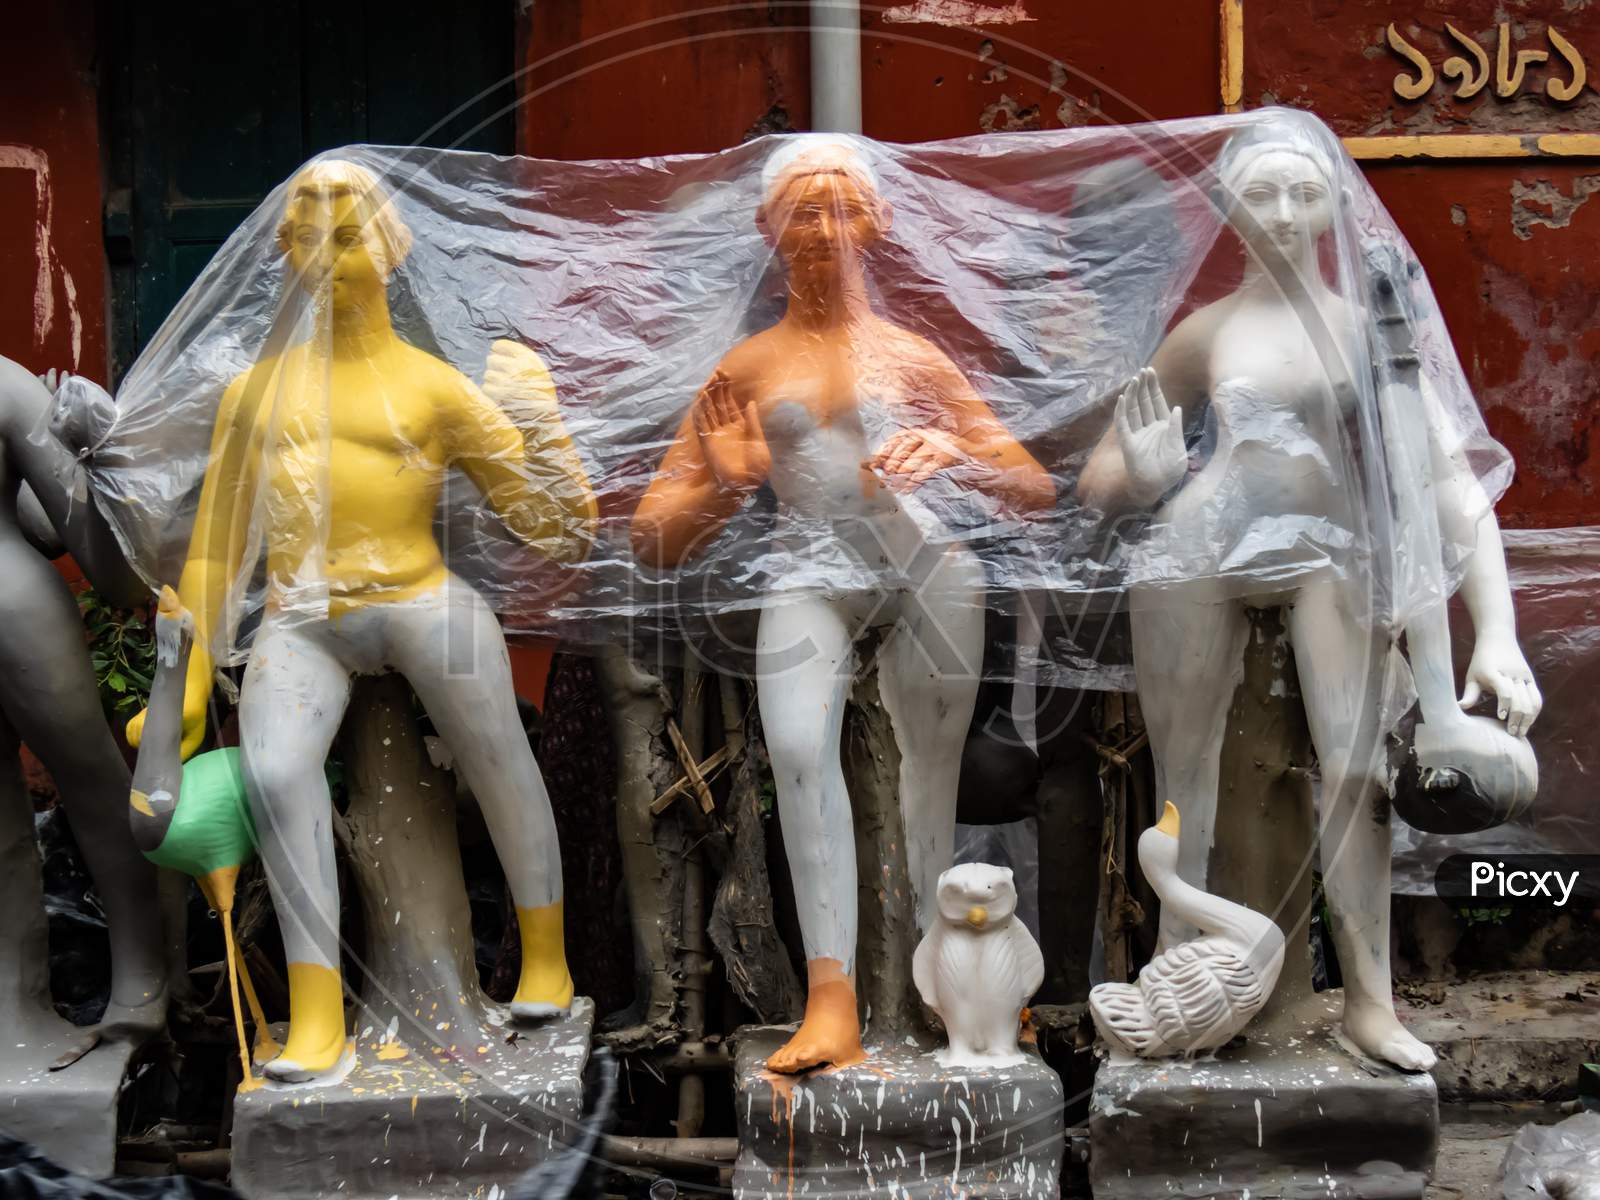 Idols Covered By Plastic To Protect From Rain.